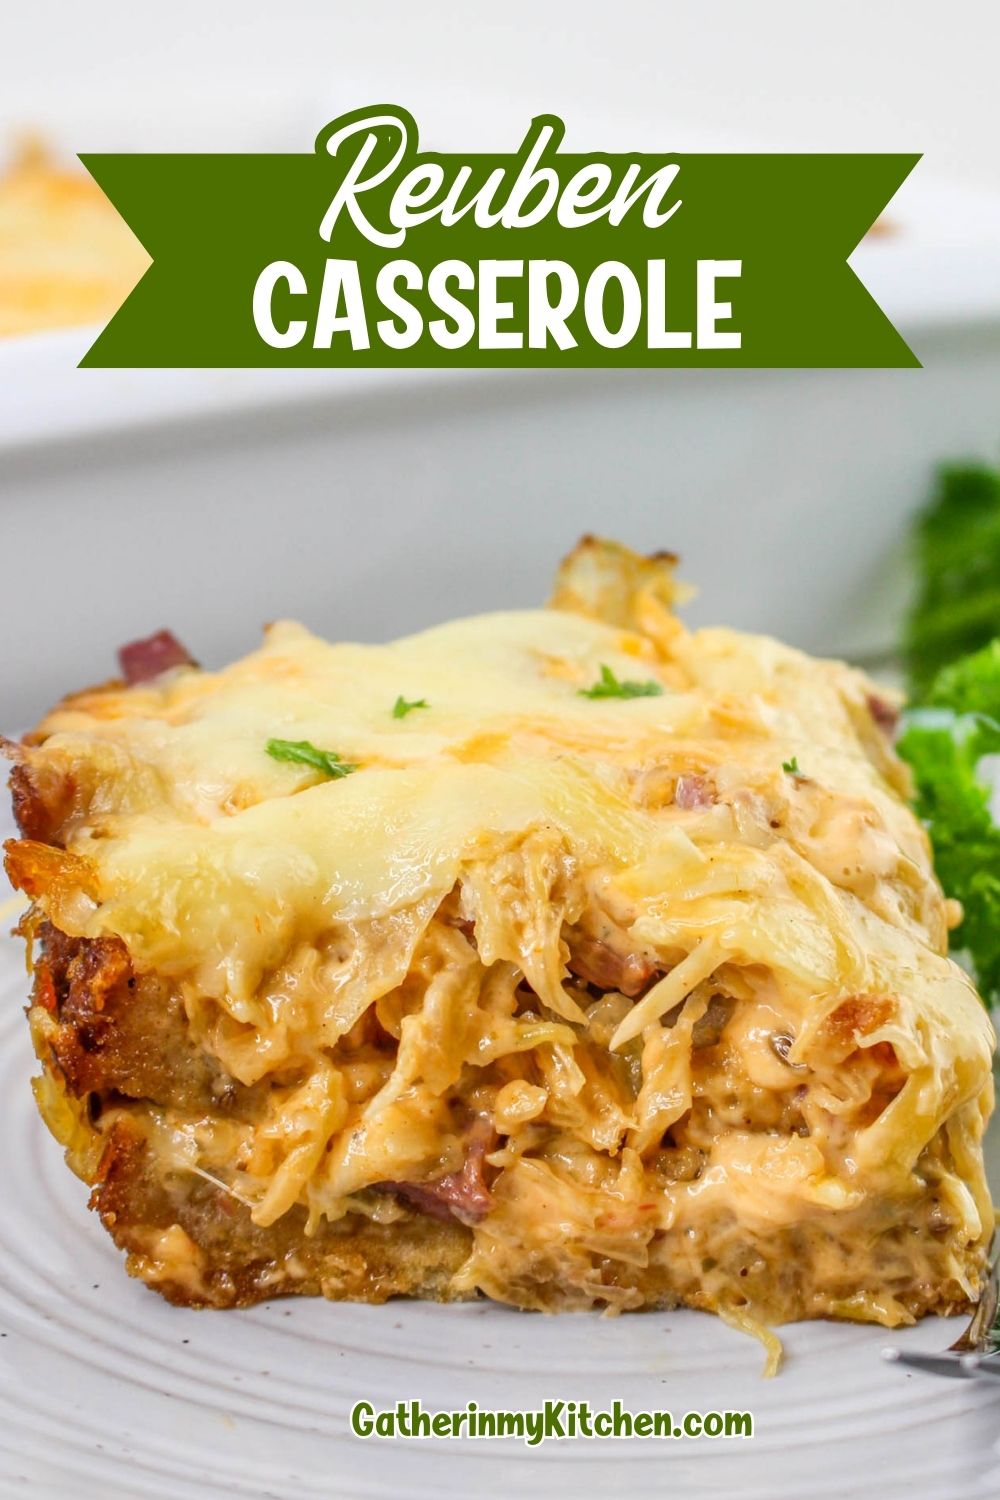 Pin image: Reuben casserole with the words "Reuben Casserole" in a banner on top.